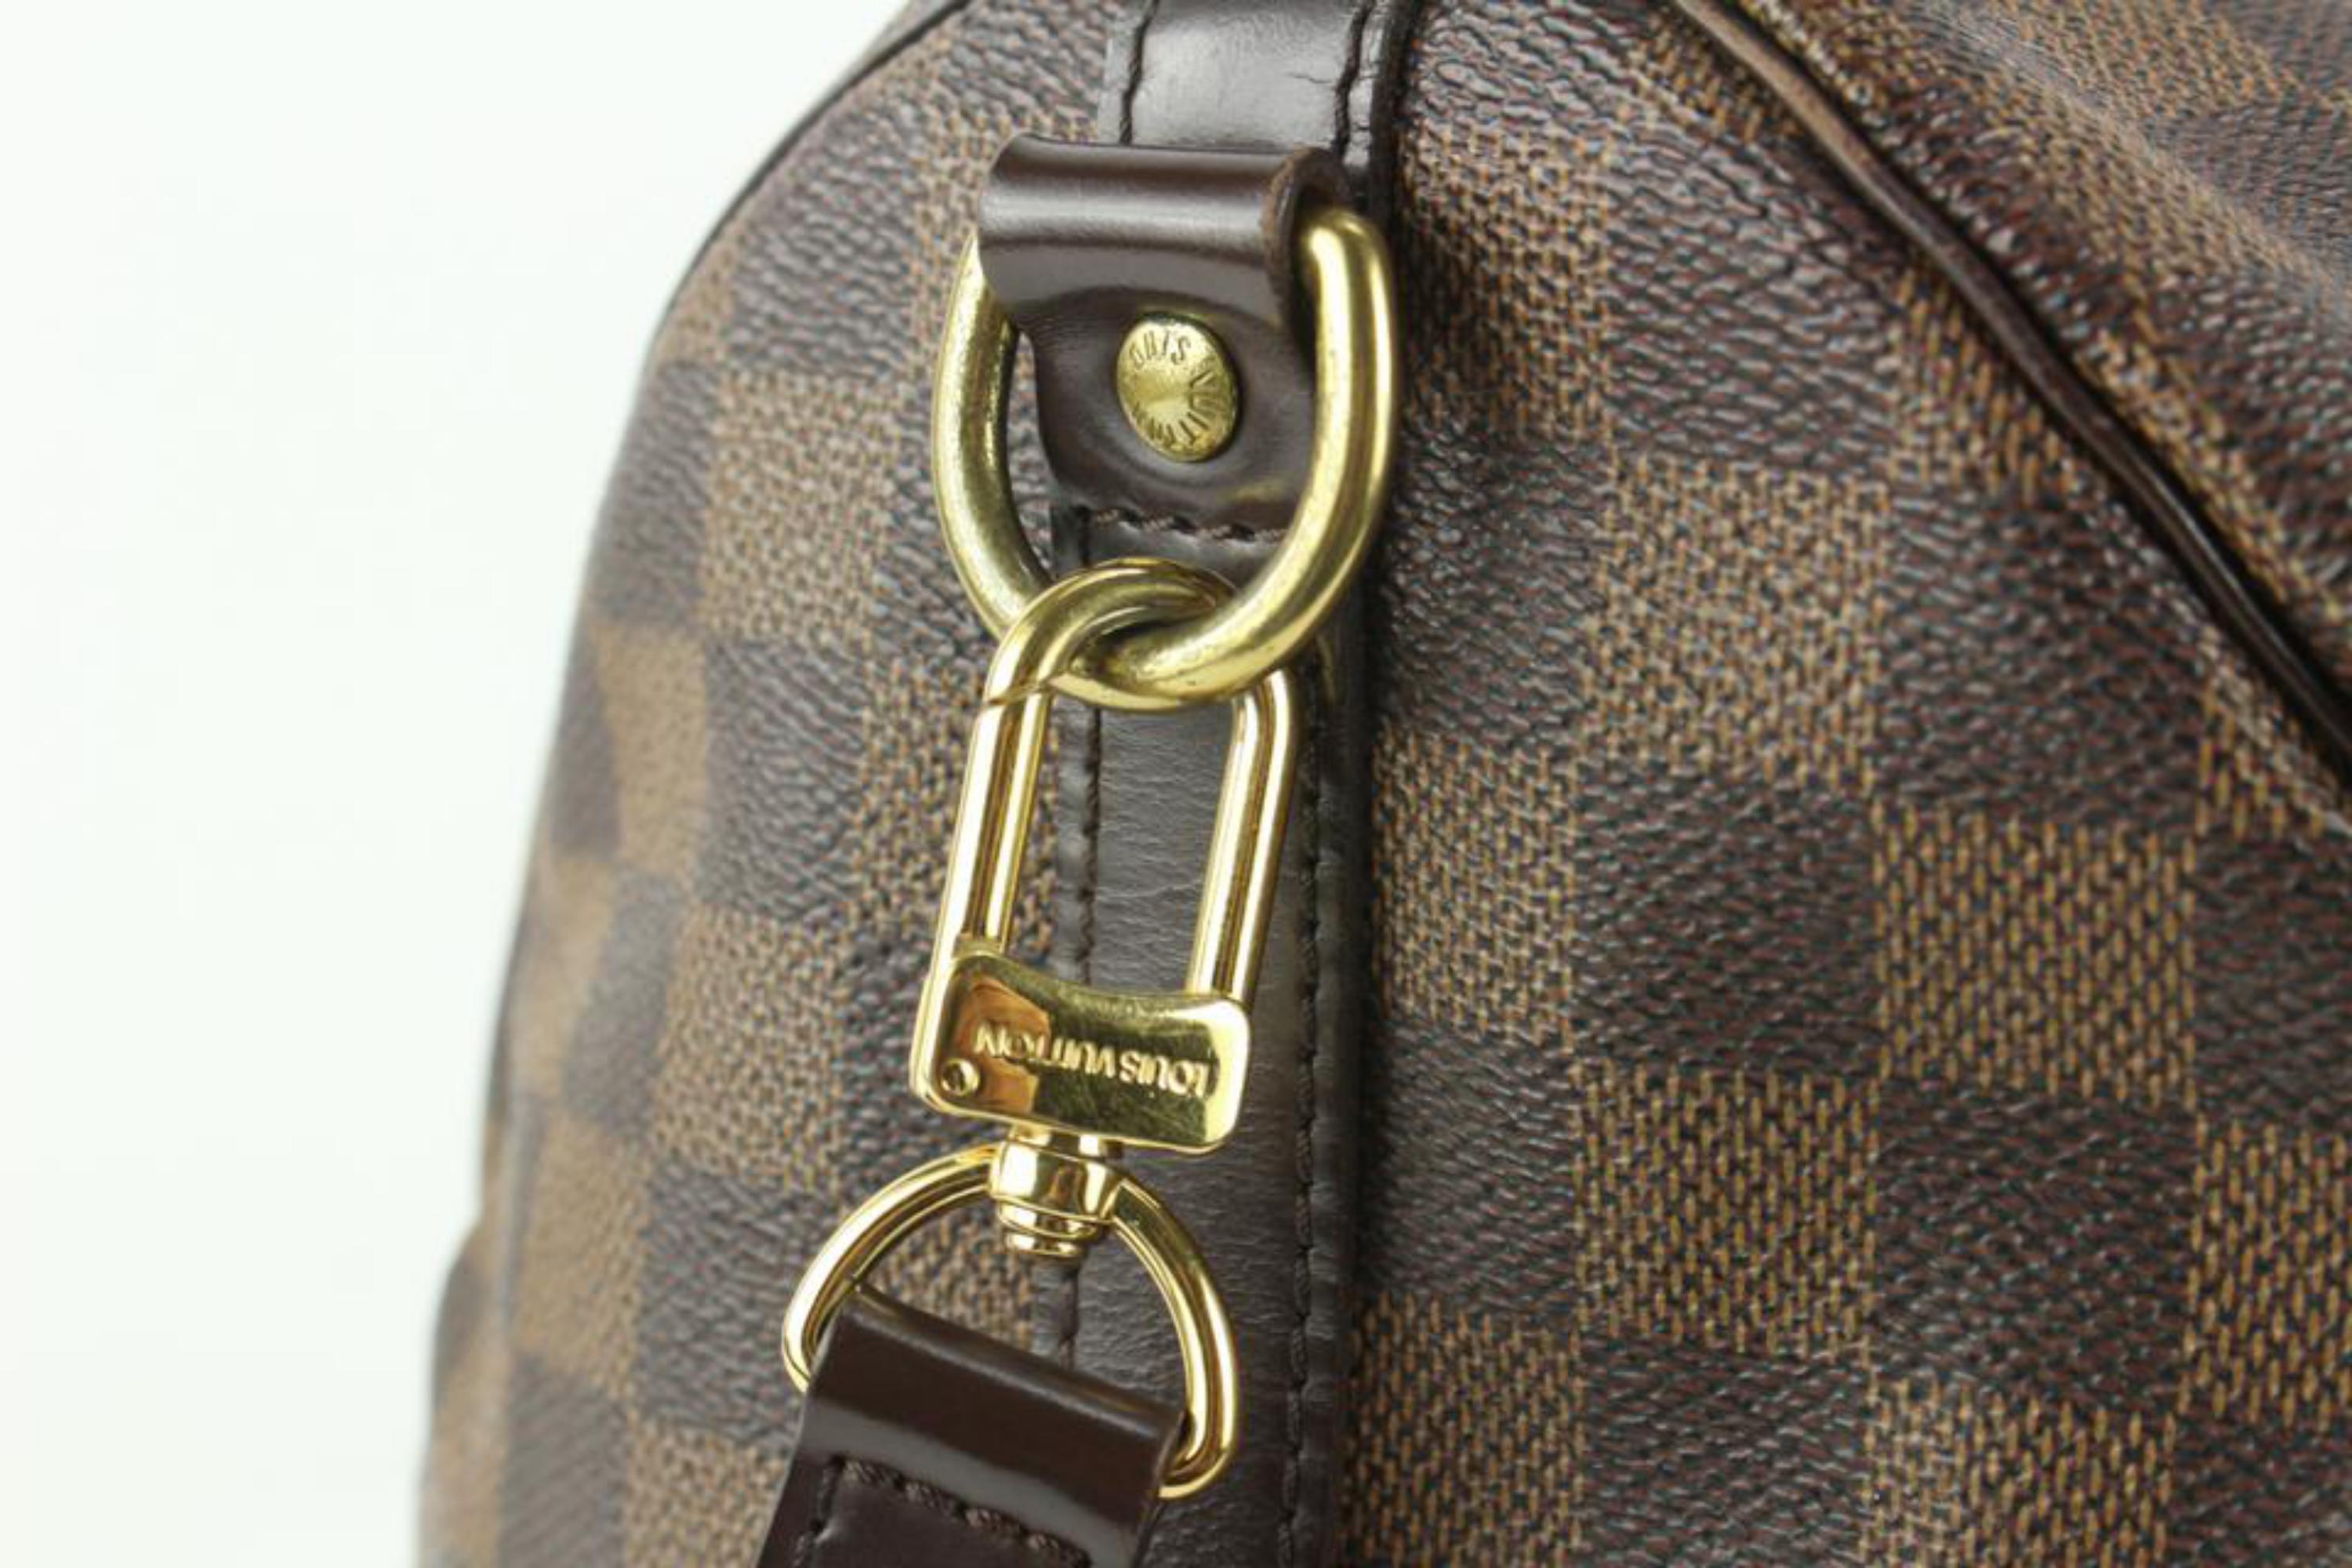 Louis Vuitton Damier Ebene Speedy Bandouliere 35 with Strap 112lv21 In Good Condition For Sale In Dix hills, NY